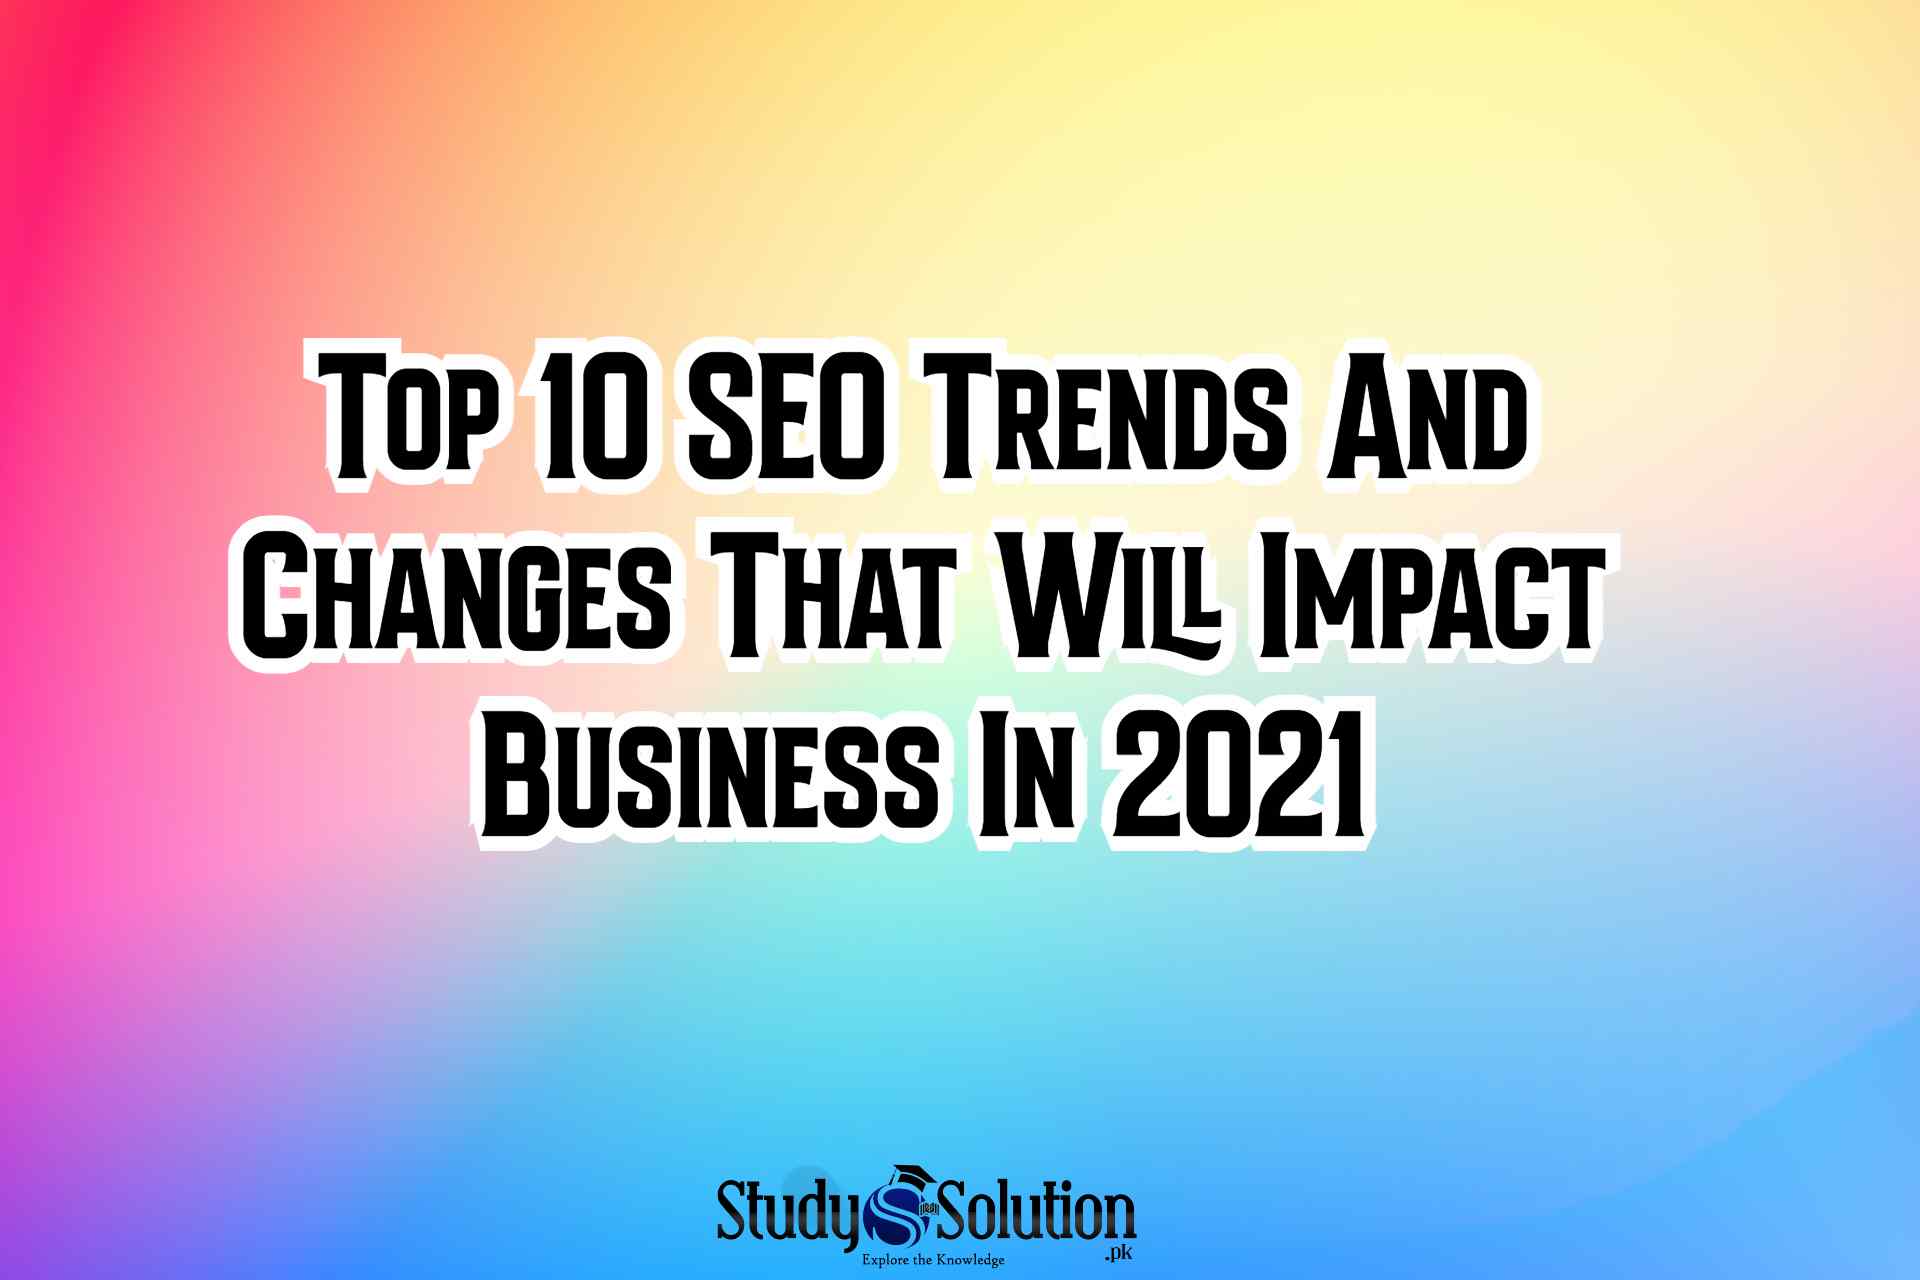 Top 10 SEO Trends And Changes That Will Impact Business In 2021